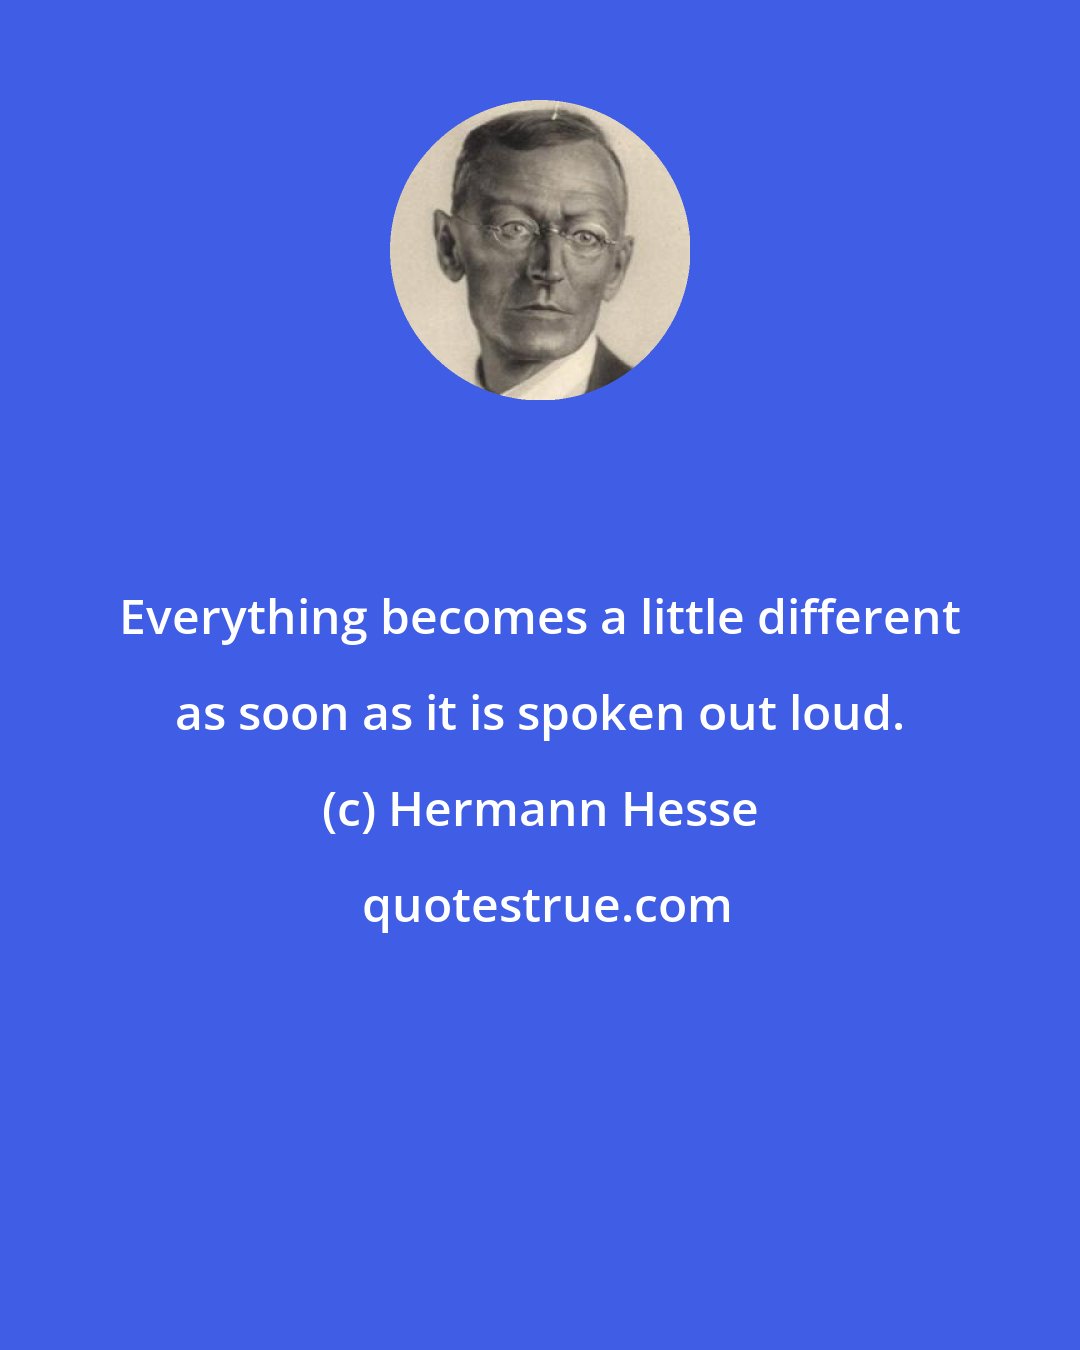 Hermann Hesse: Everything becomes a little different as soon as it is spoken out loud.